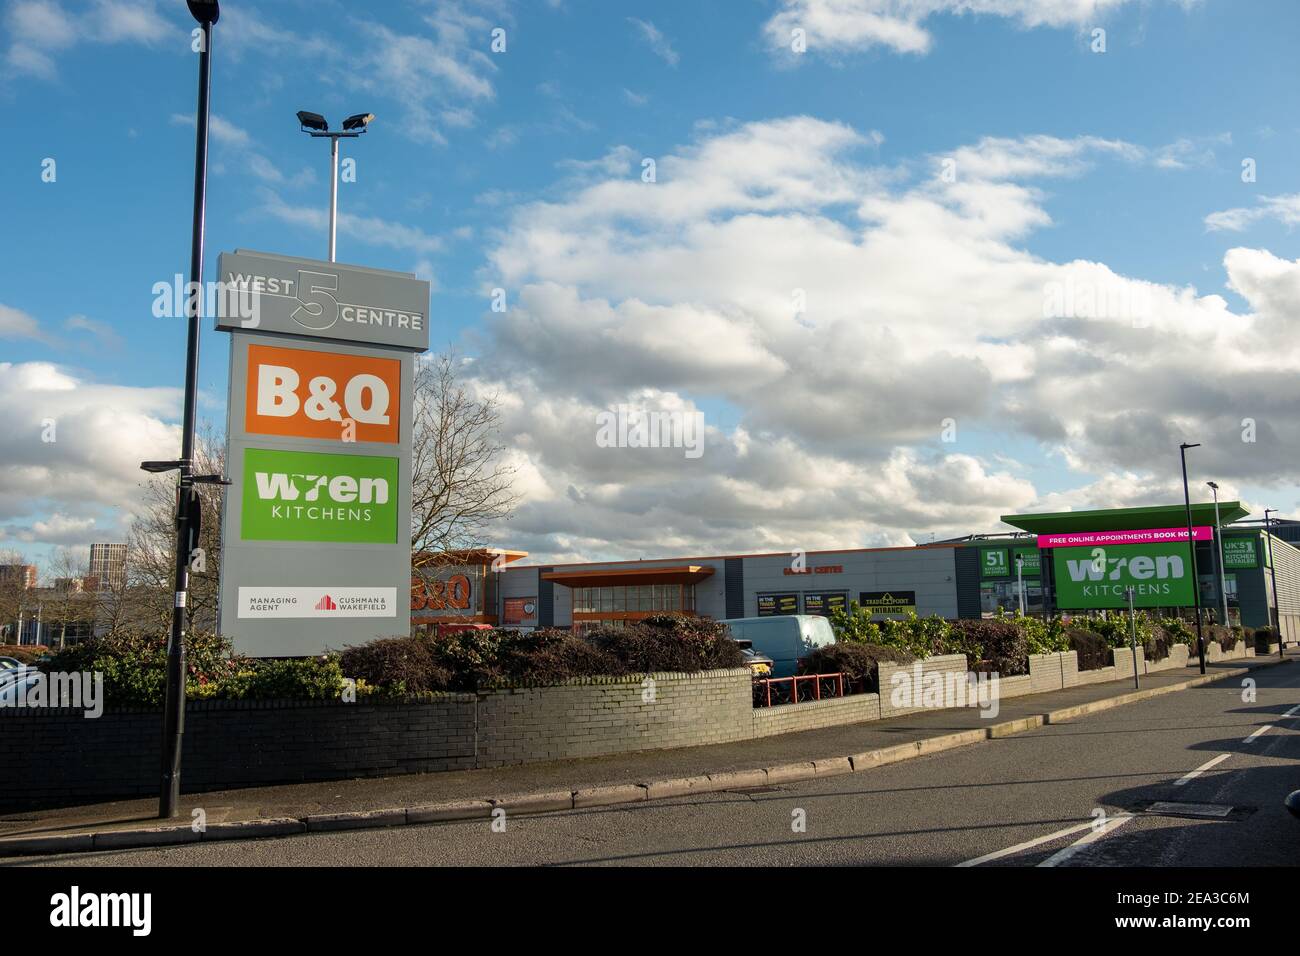 London-  West 5 Centre, a retail park in West London with B & Q and Wren Kitchen branches Stock Photo